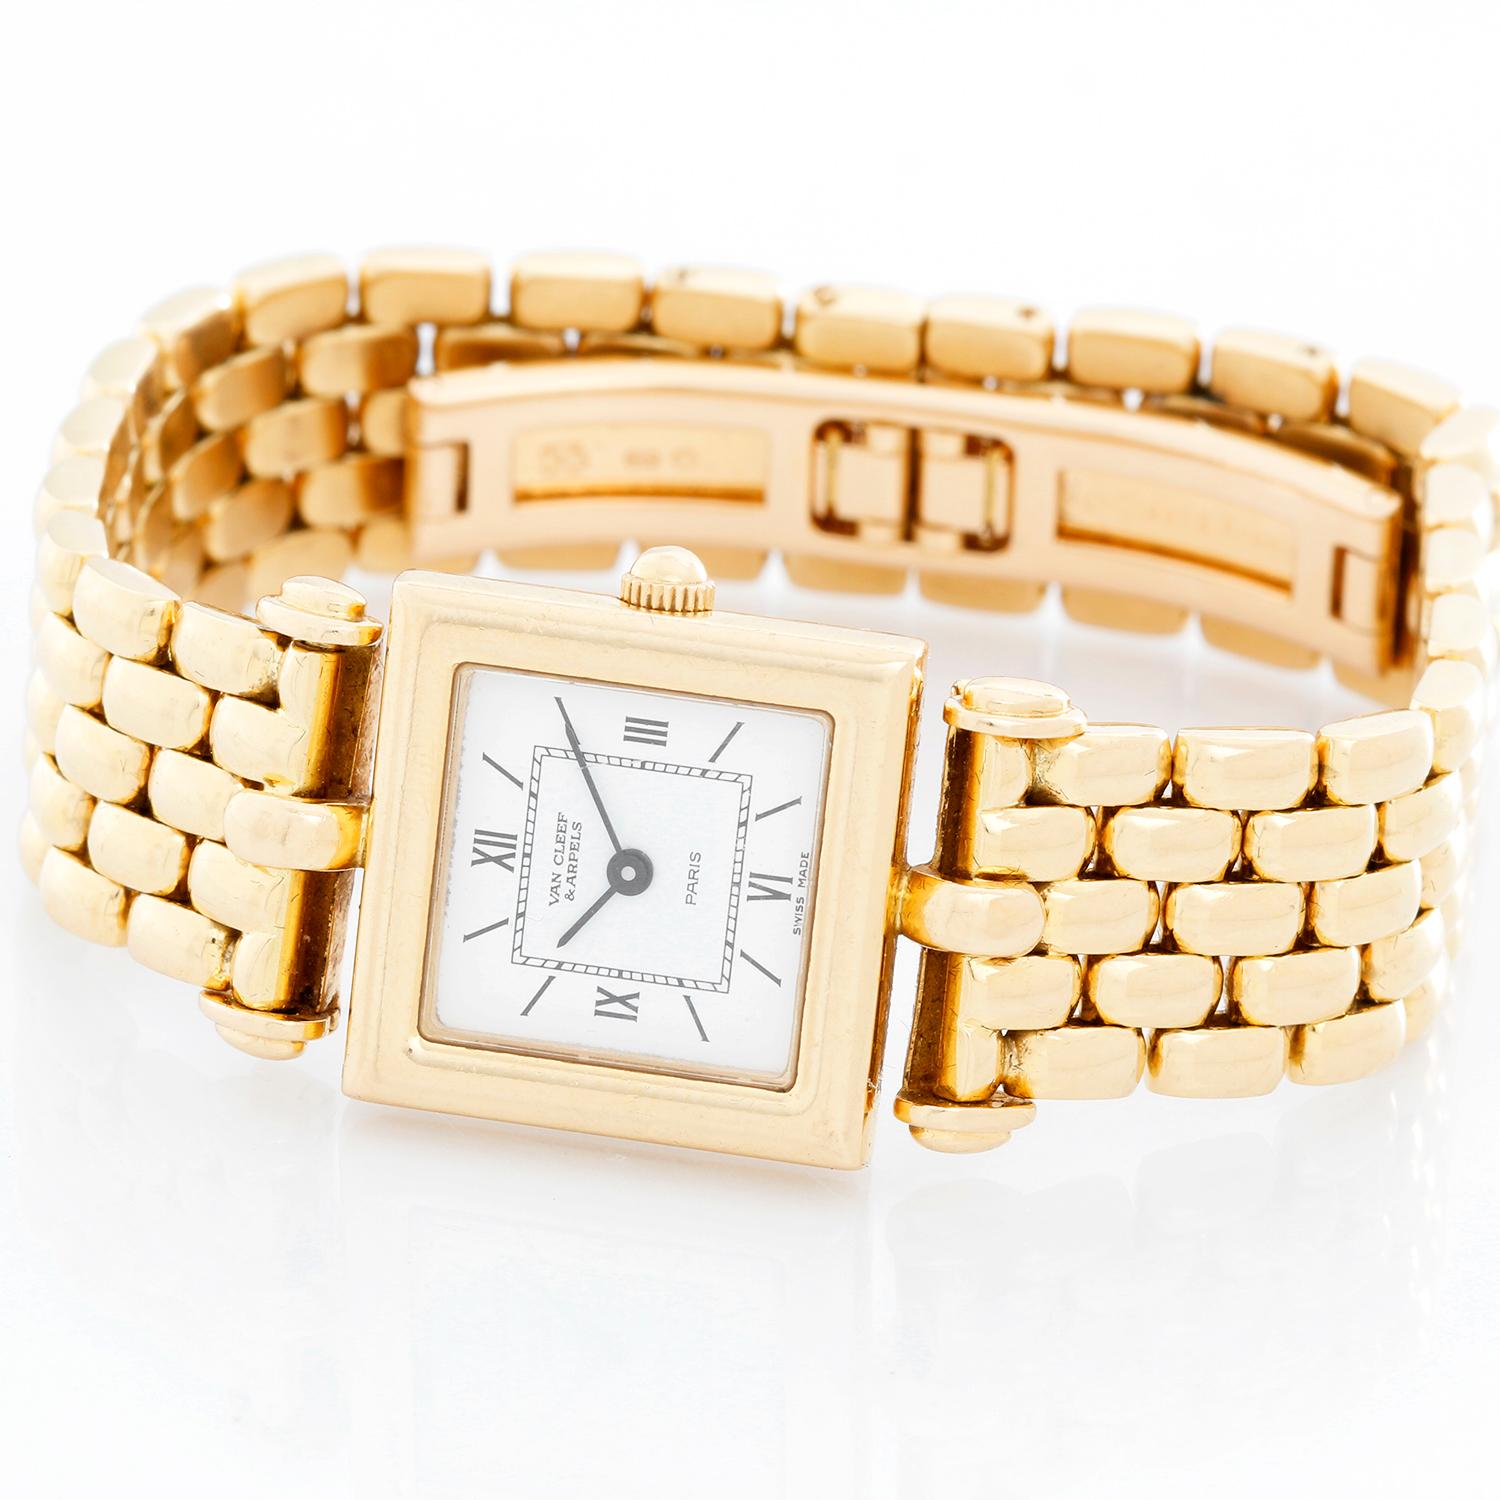 Van Cleef & Arpels Quartz Yellow Gold Watch Ref. 122664 - Quartz. 18K Yellow gold case ( 20 mm ). White dial with Roman and stick hour markers. 18K Yellow gold double deployant.  Will fit up to a 6 1/2 inch wrist. Pre-owned with Van Cleef & Arpels